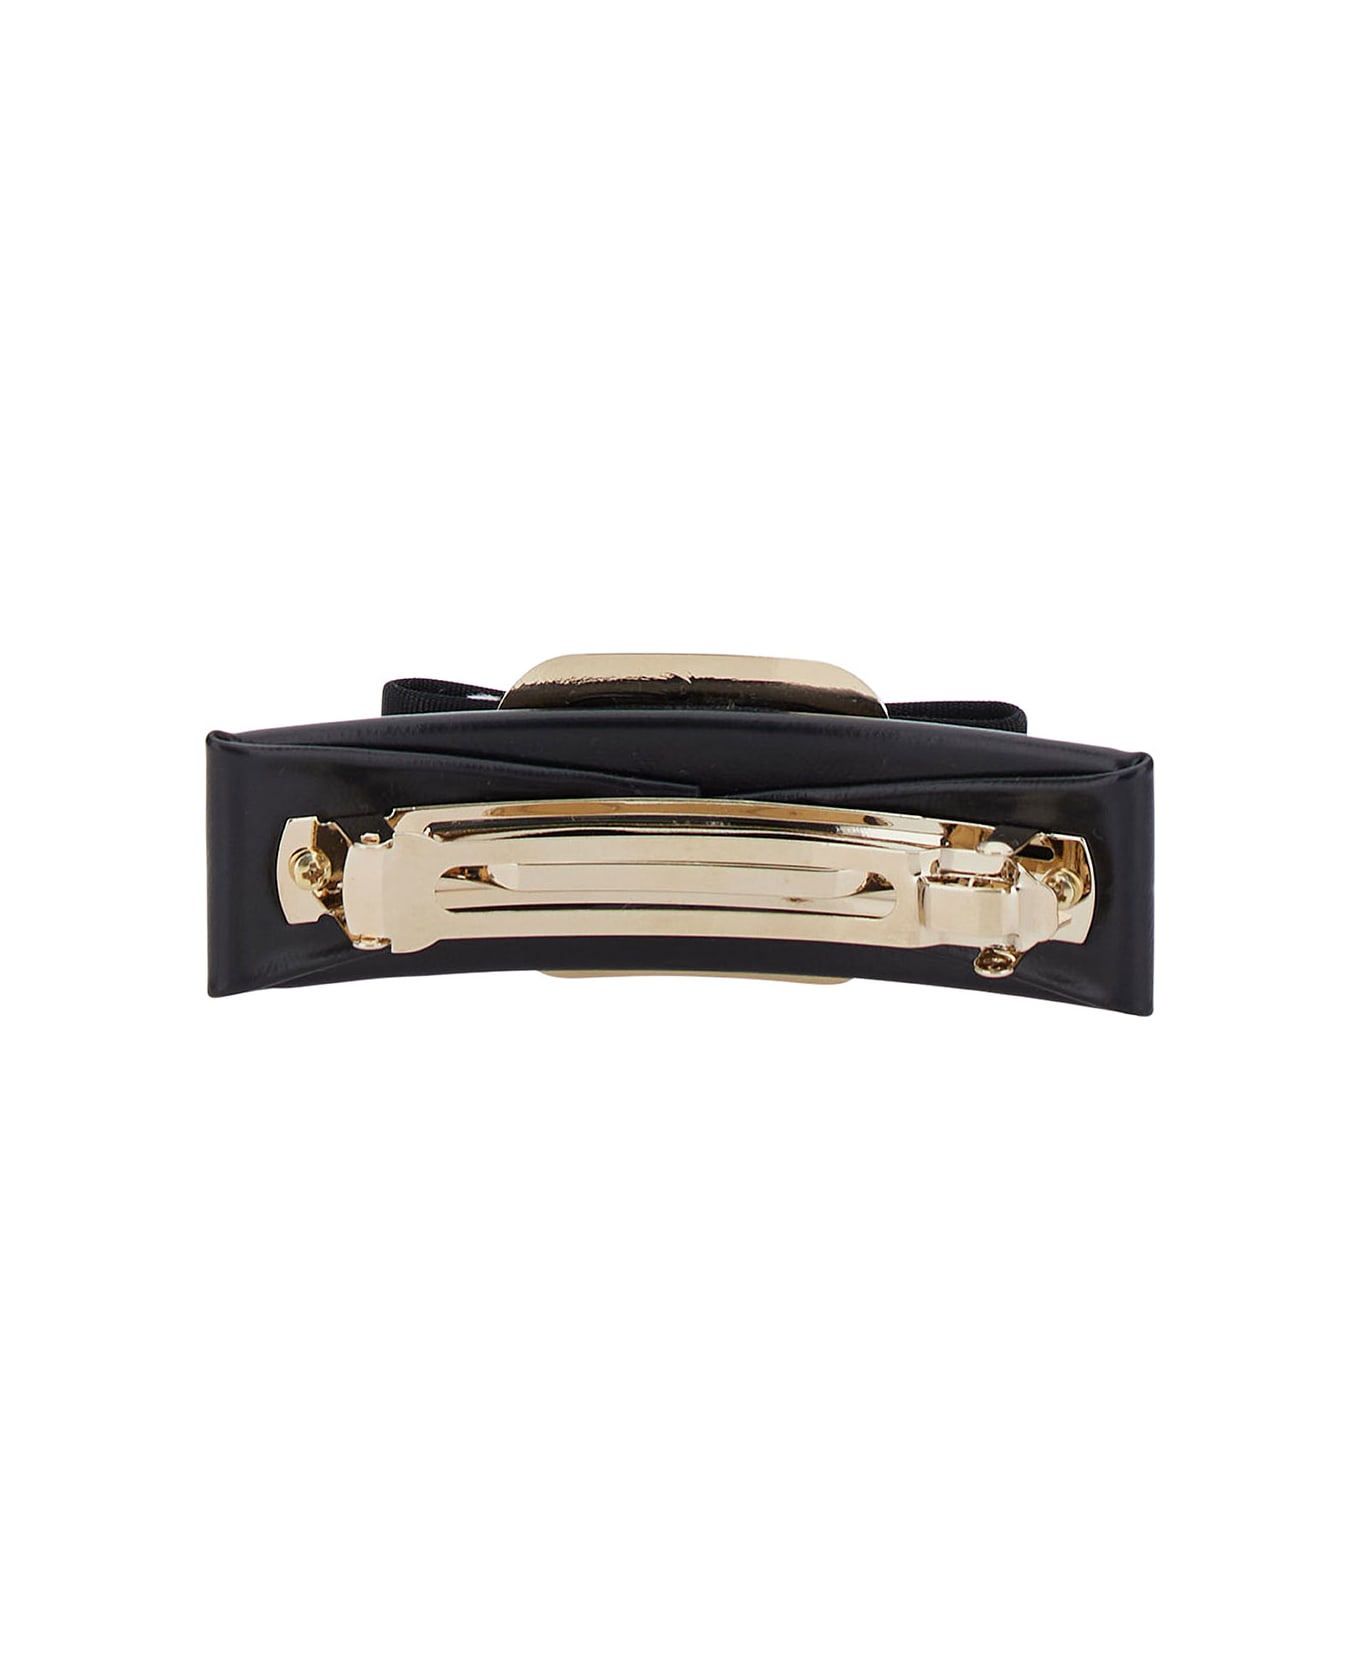 Ferragamo Black Hairclip With Vara Bow In Leather Blend Woman - Black ブローチ